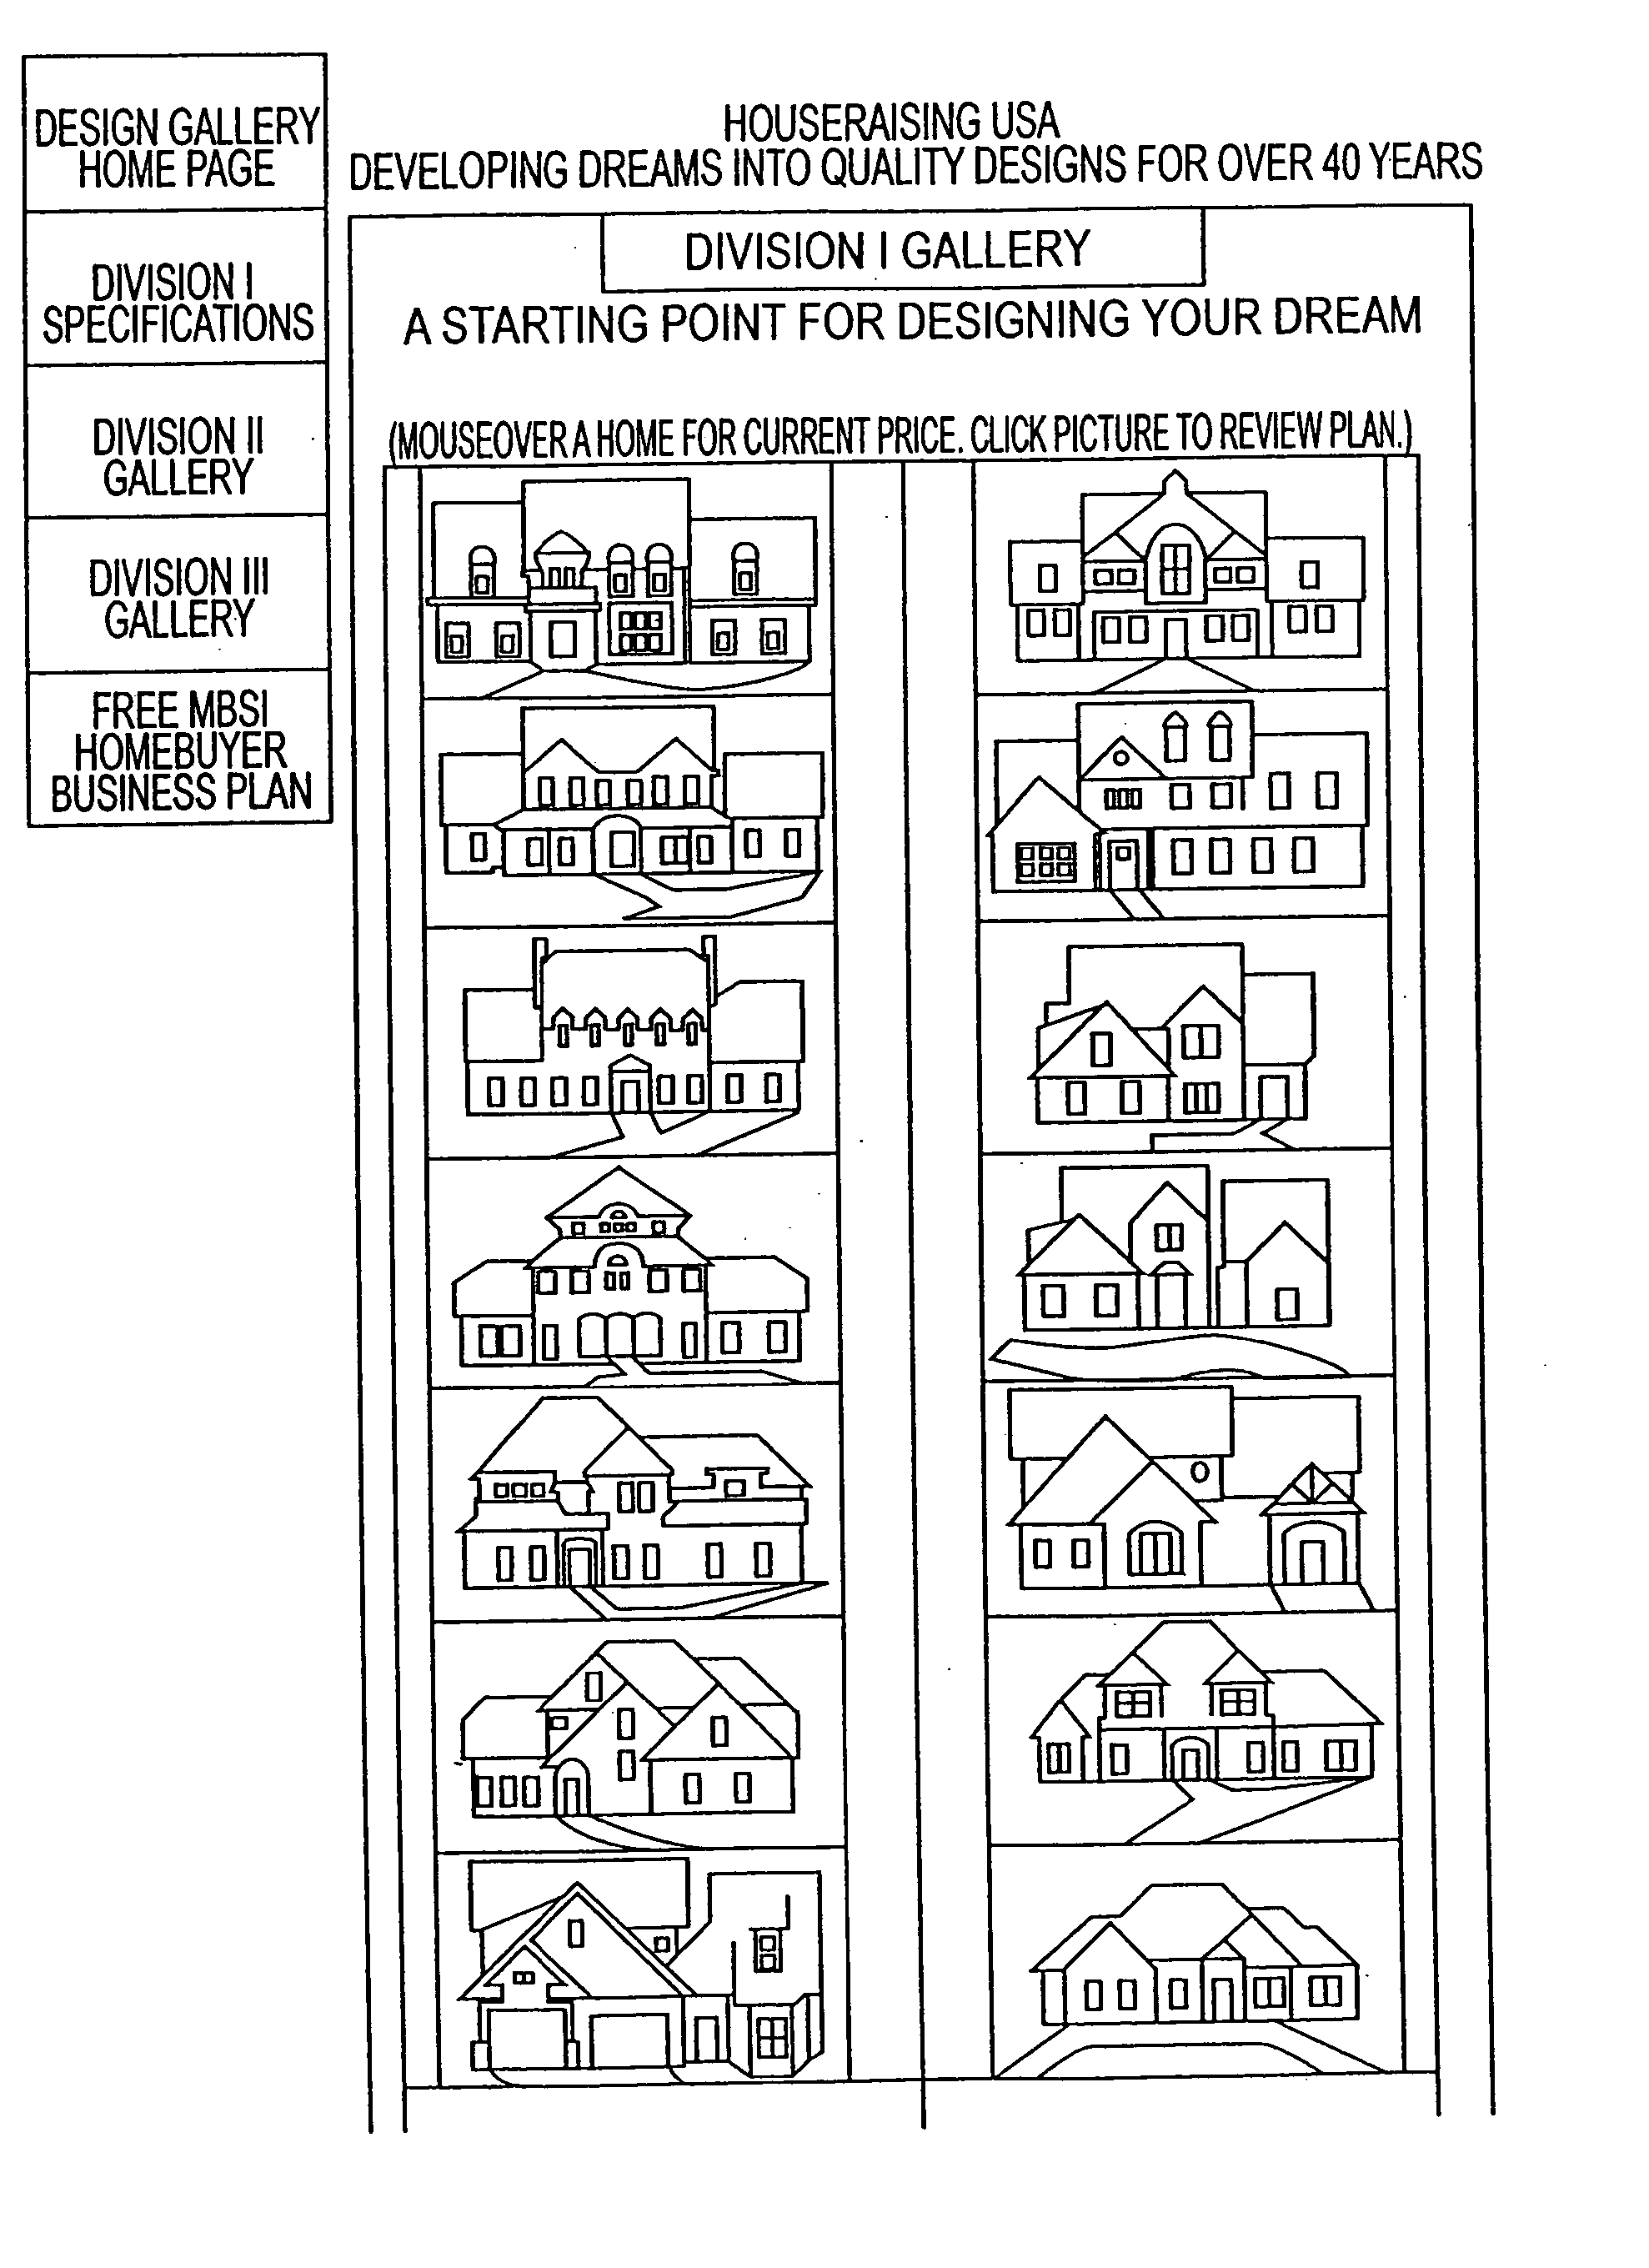 System and method for automated management of custom home design and build projects